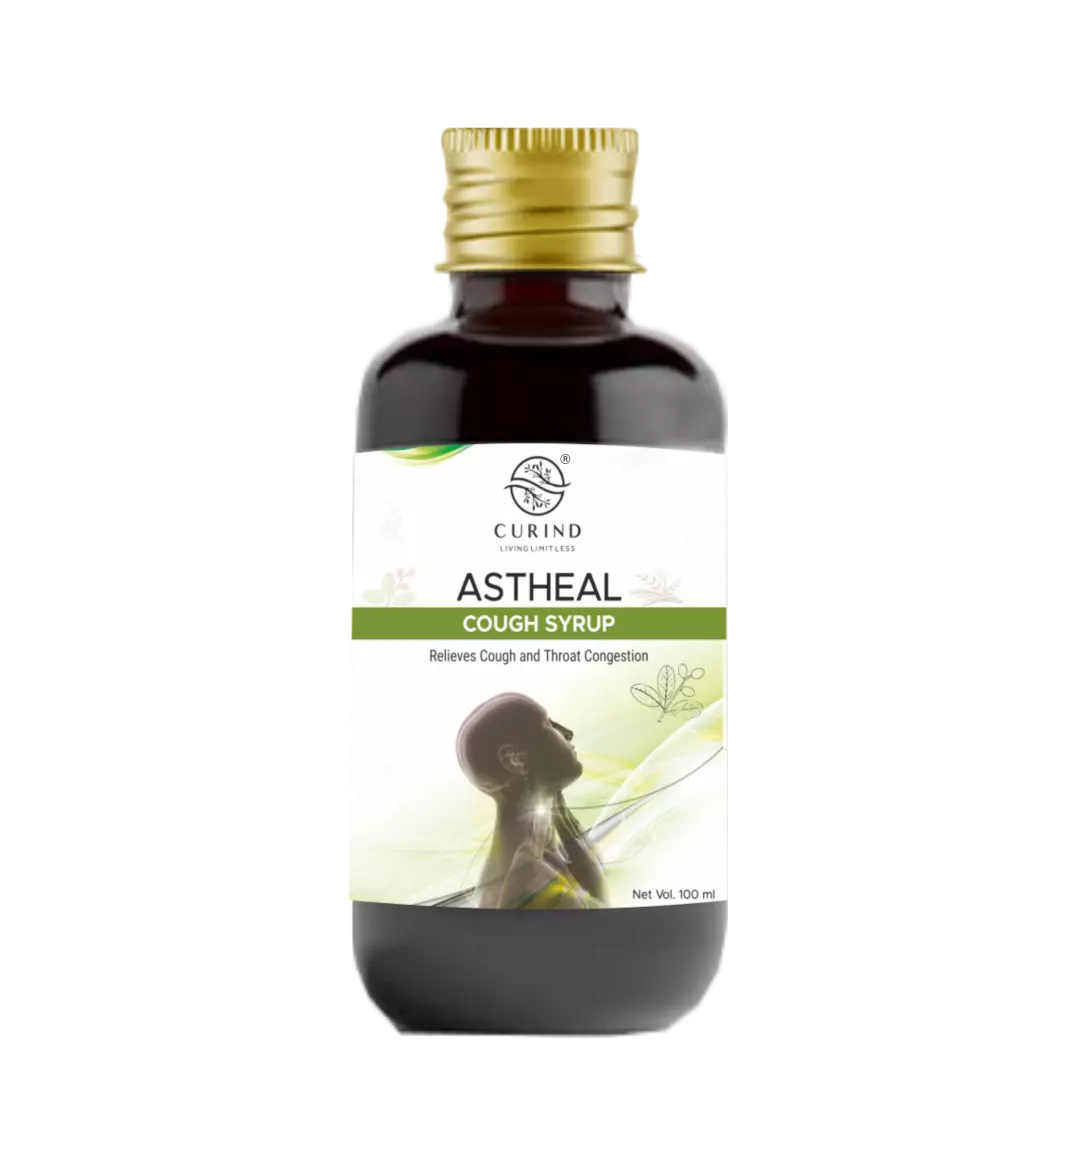 CURIND Astheal Cough Syrup- best ayurvedic cough syrup